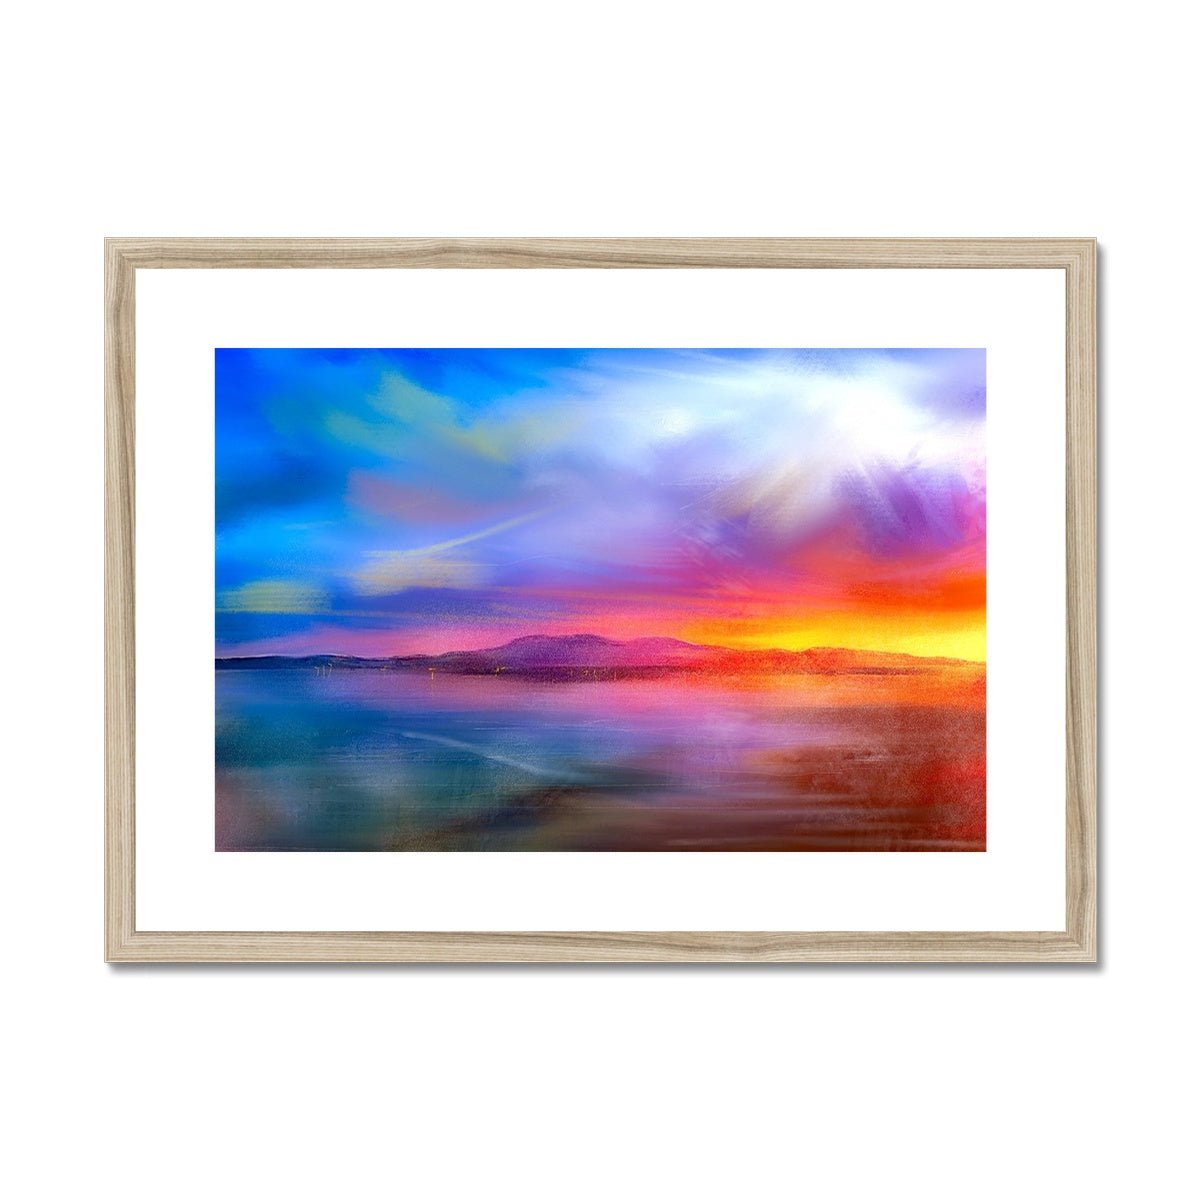 Arran Sunset Painting | Framed & Mounted Prints From Scotland-Framed & Mounted Prints-Arran Art Gallery-A2 Landscape-Natural Frame-Paintings, Prints, Homeware, Art Gifts From Scotland By Scottish Artist Kevin Hunter